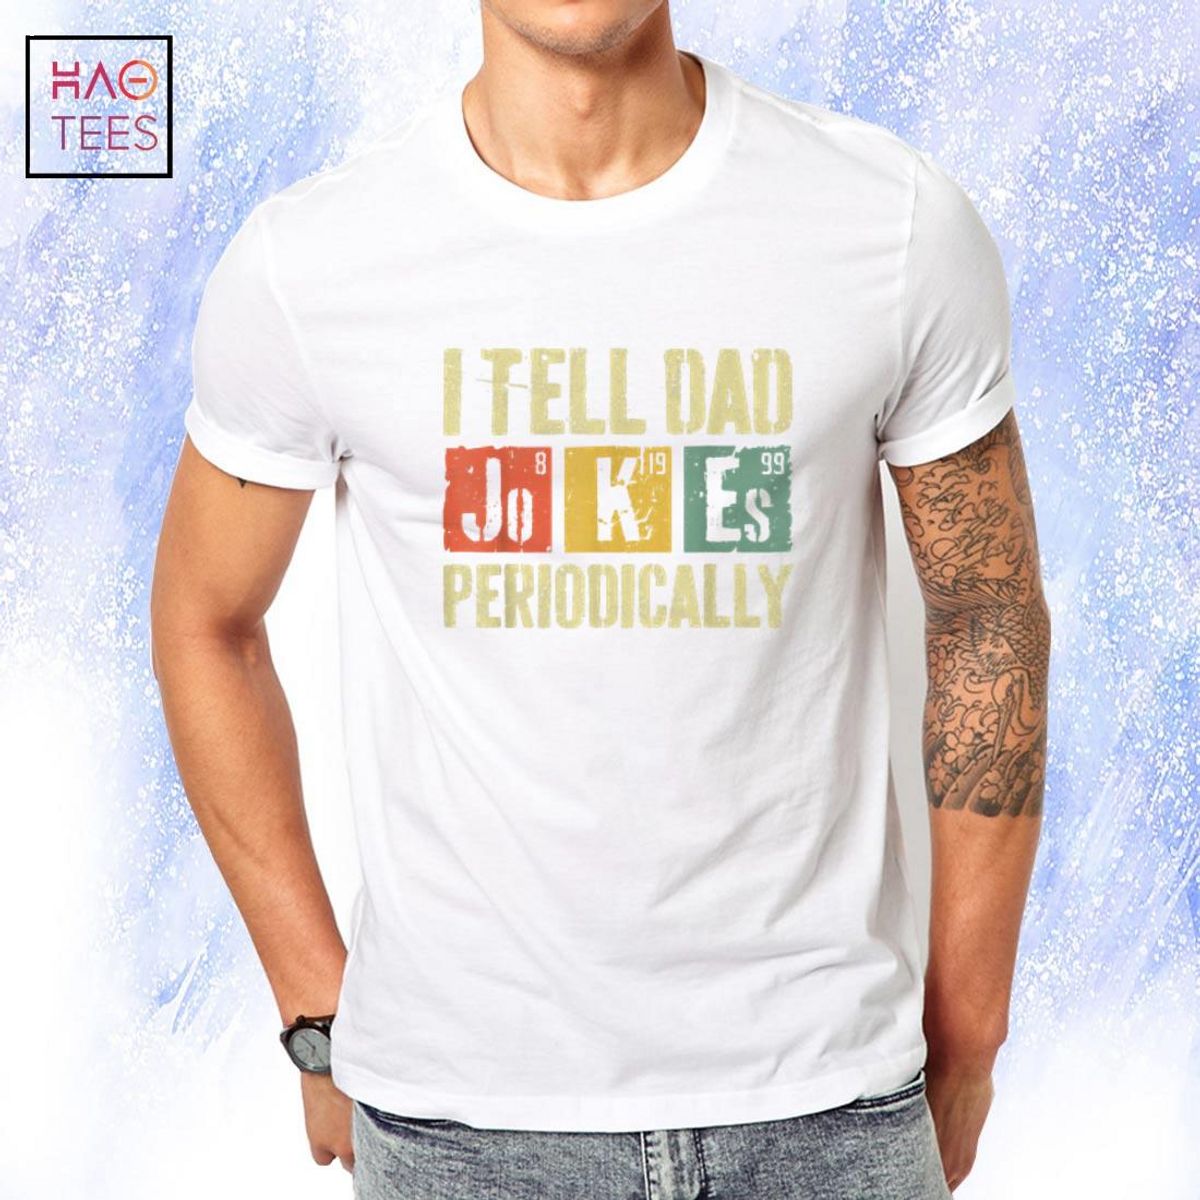 Mens I Tell Dad Jokes Periodically T-Shirt Father's Day Shirt